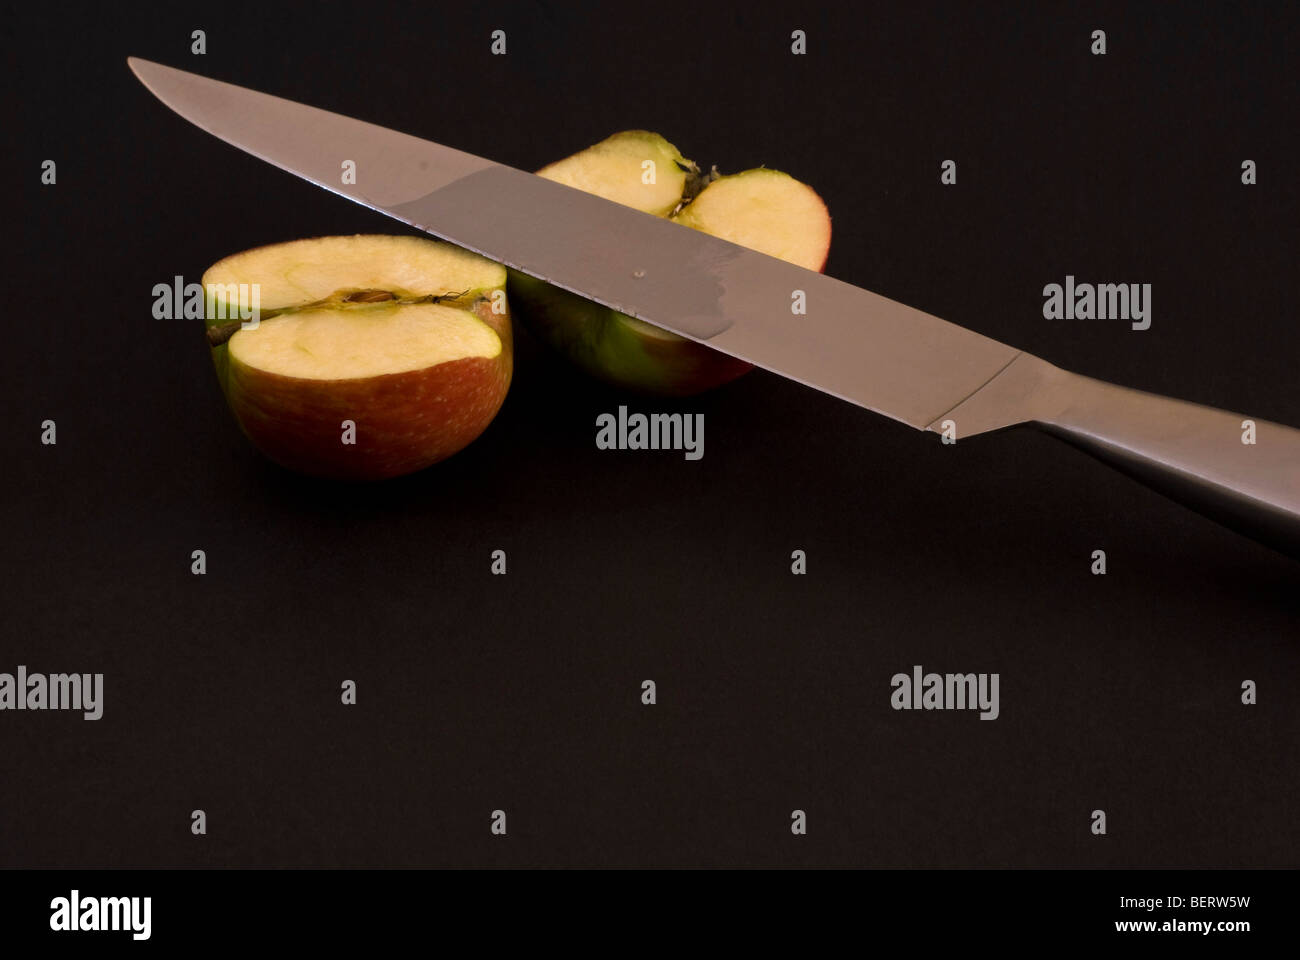 Apple sliced with kitchen knife Stock Photo